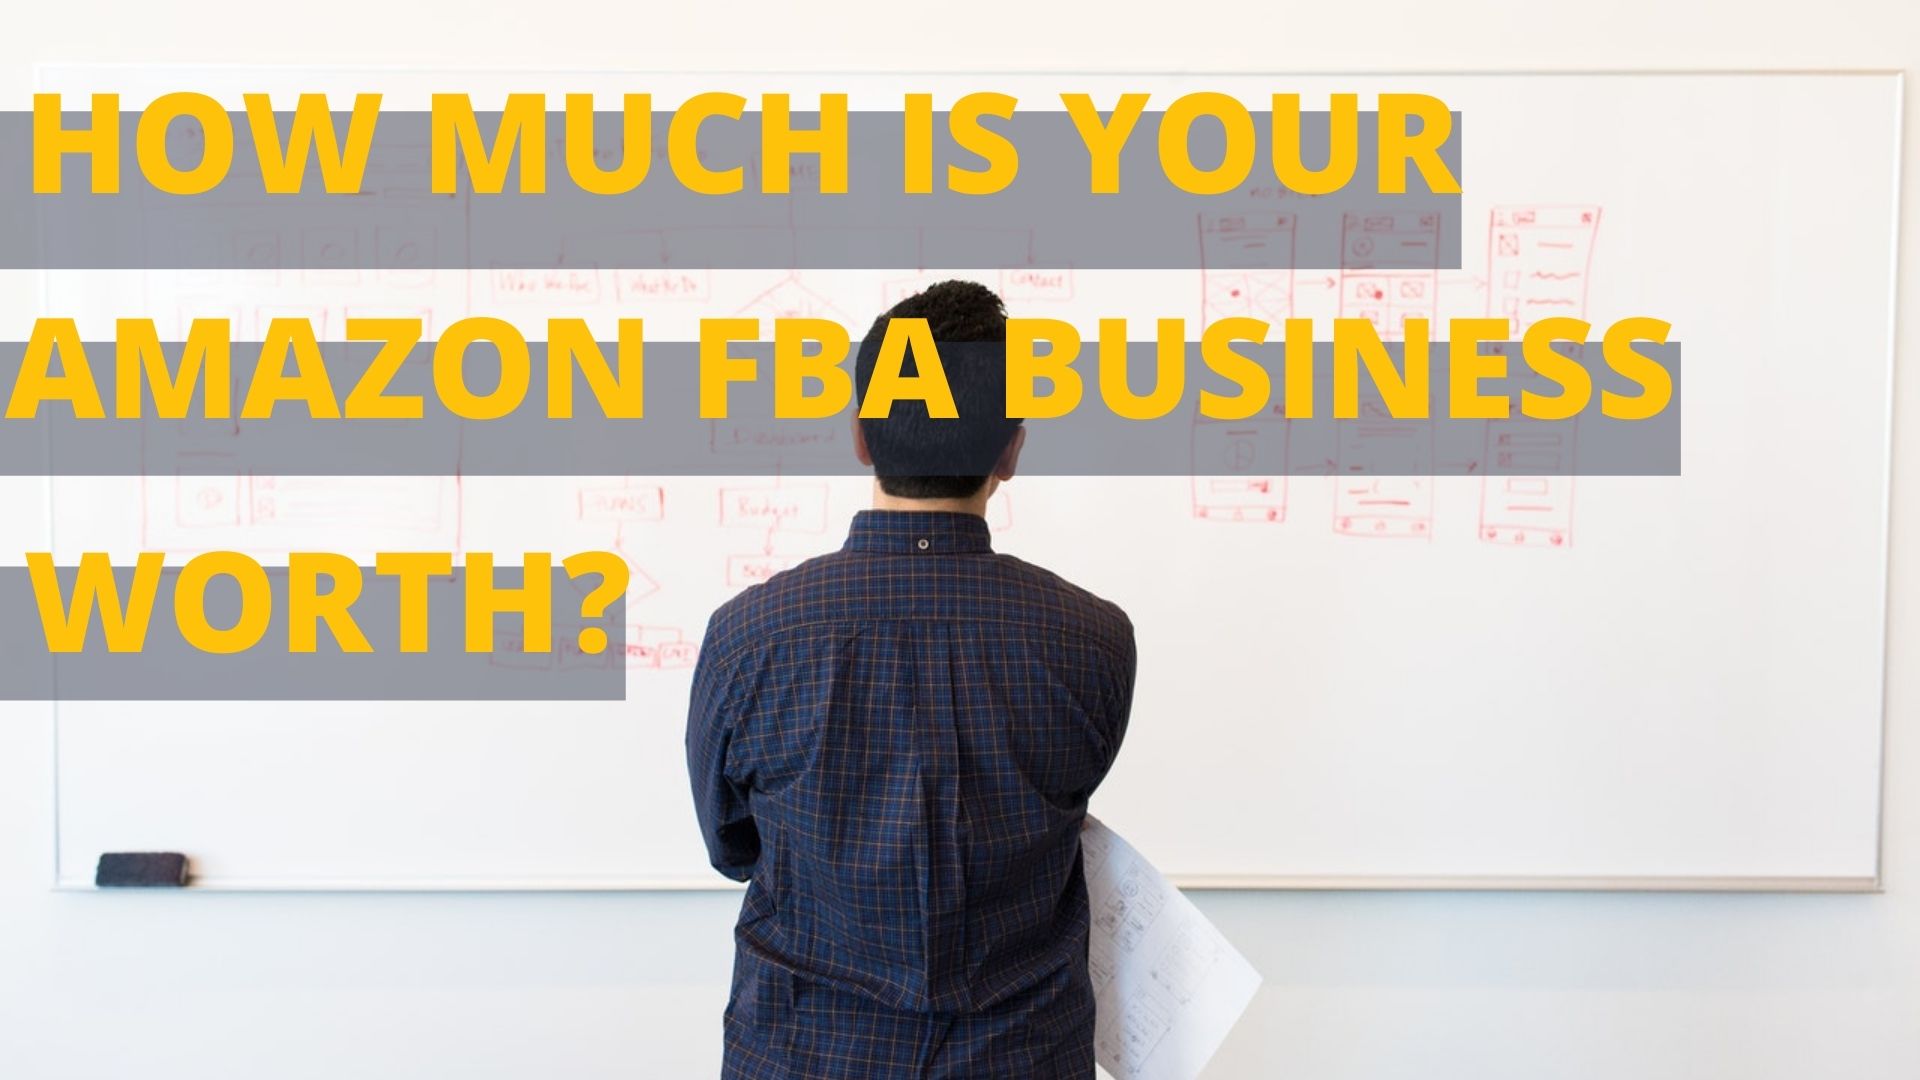 How To Find Out How Much Your Amazon FBA Business is Worth – Quick Calculation Tips & Multiples